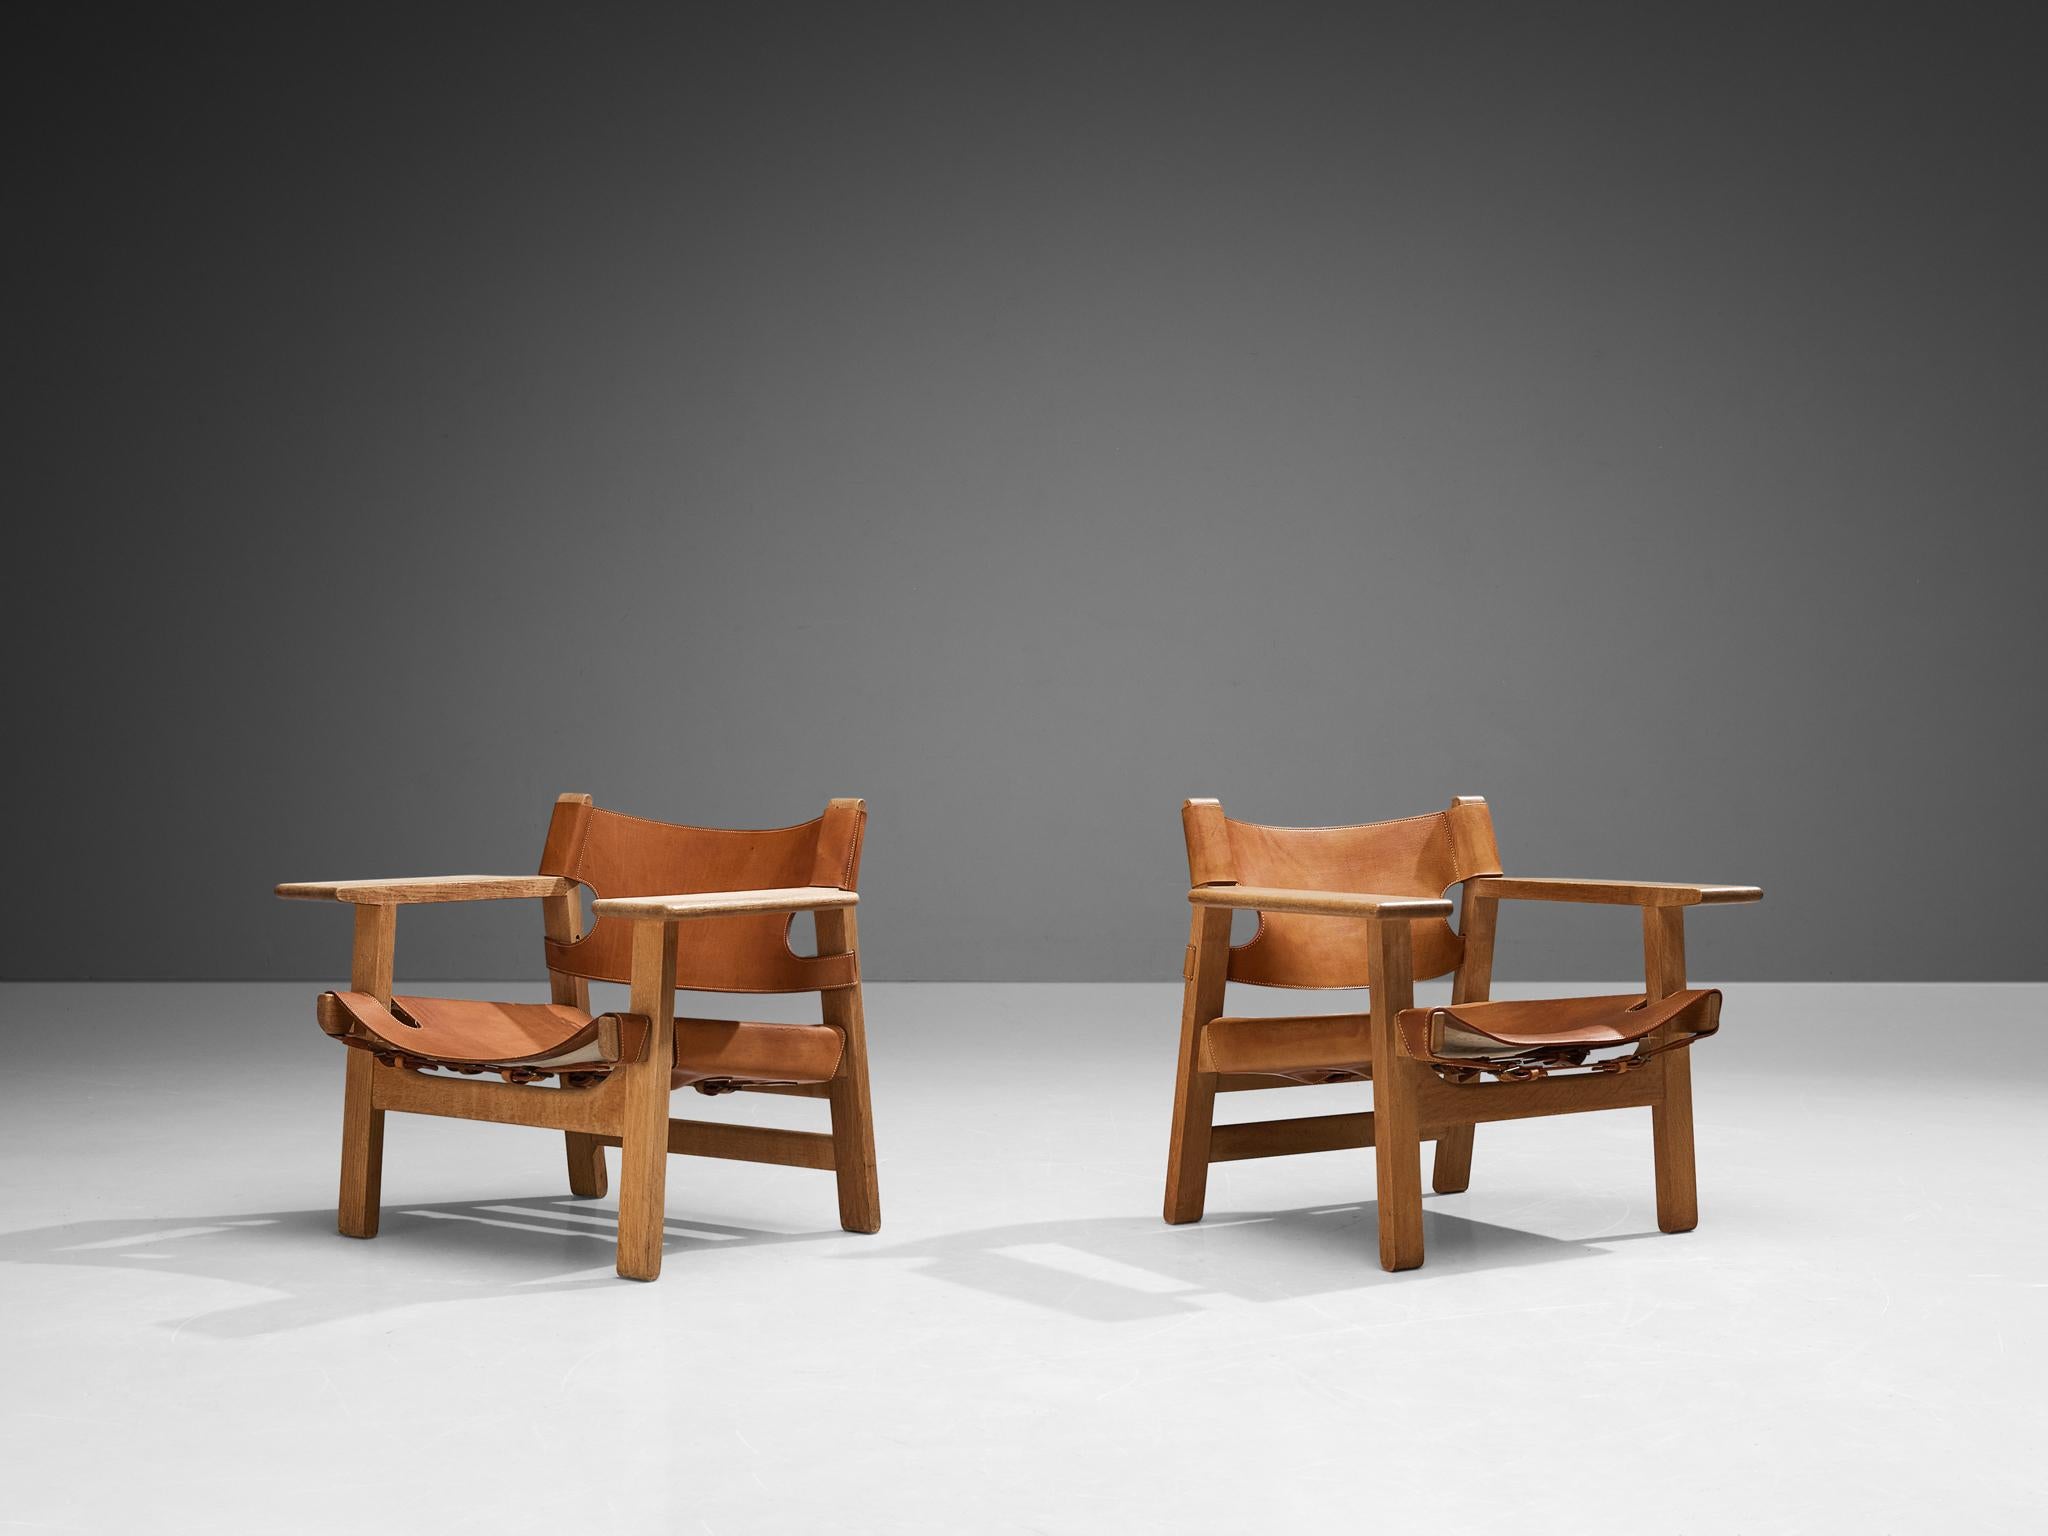 Børge Mogensen for Fredericia Stolefabrik, pair of 'Spanish Chairs,' oak, leather, brass, Denmark, 1958.

This well-known design by Børge Mogensen has a very strong appearance. The sincere construction and type of upholstery, give the chair a